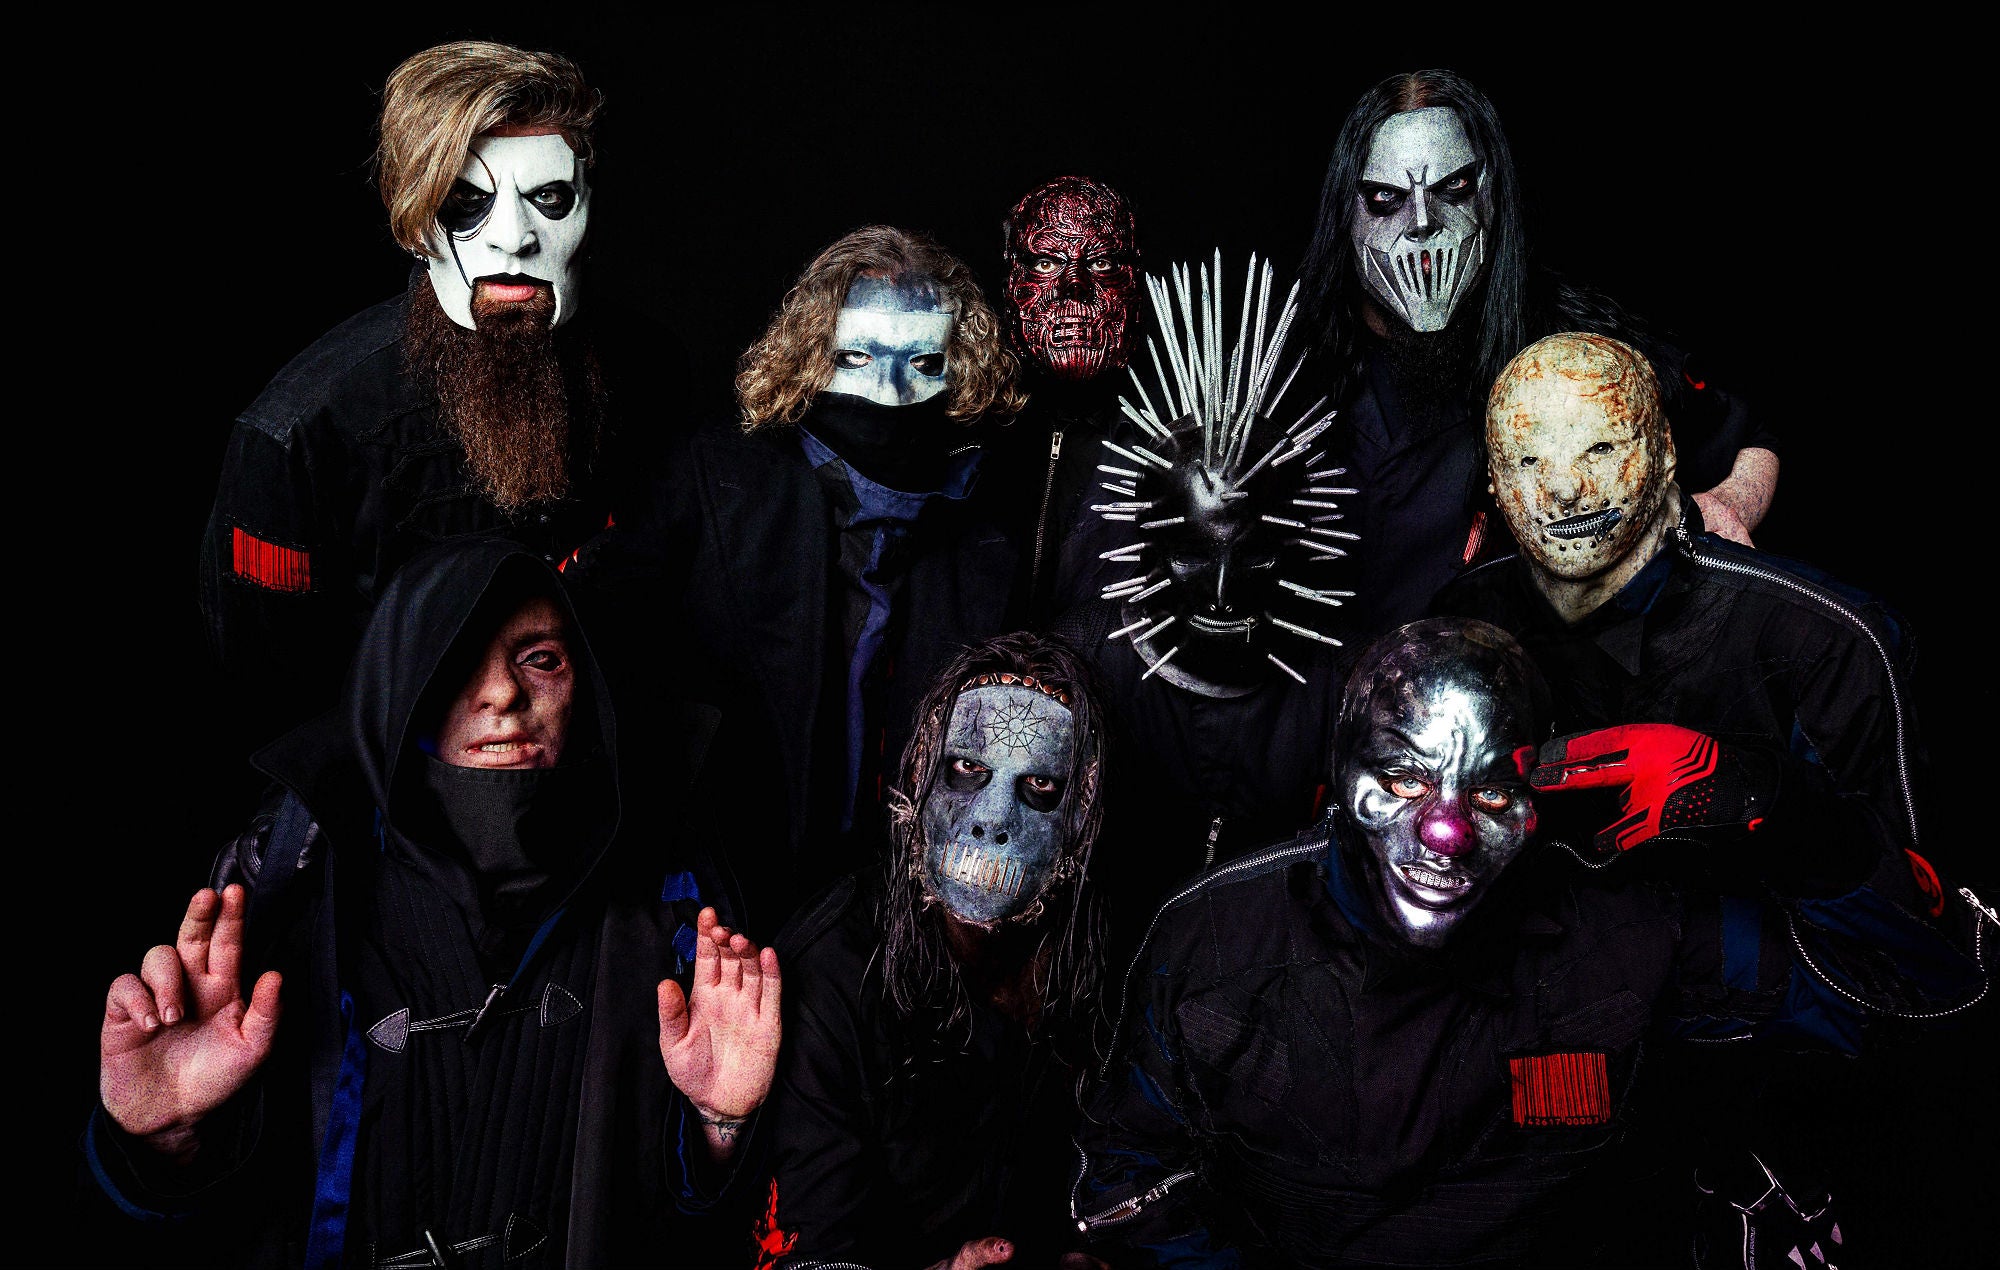 Slipknot are bringing Knotfest to Canada